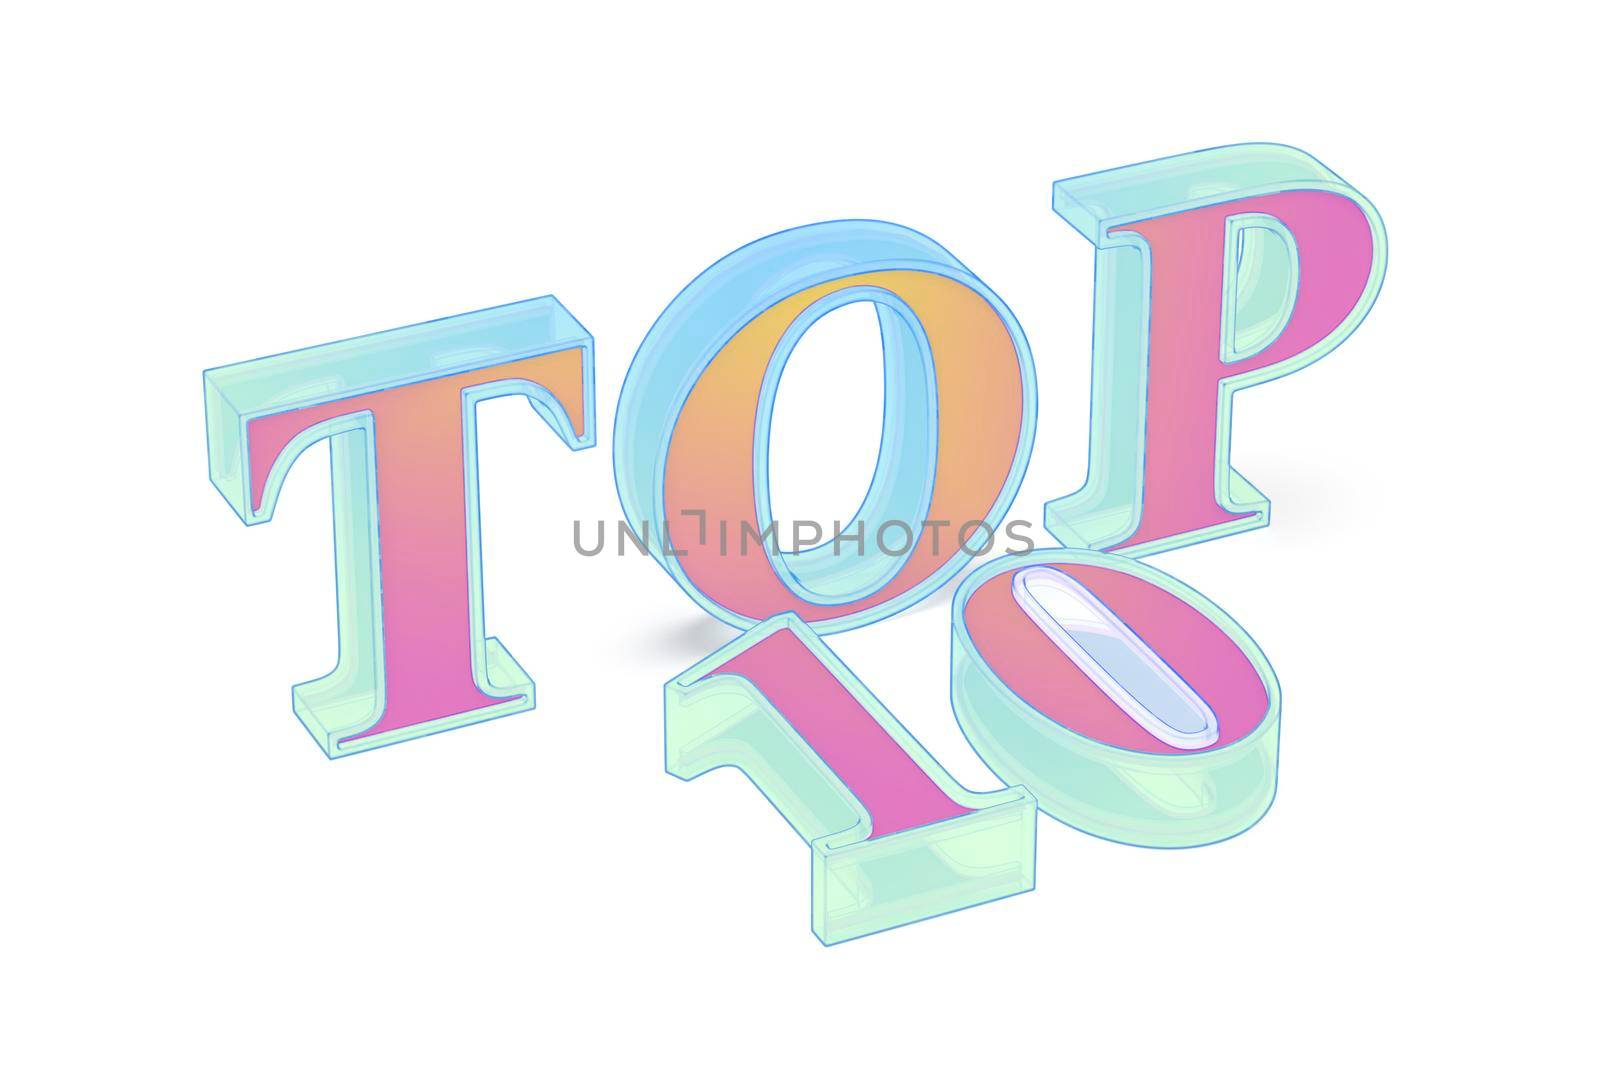 Top 10 text on white background. The best ten list.